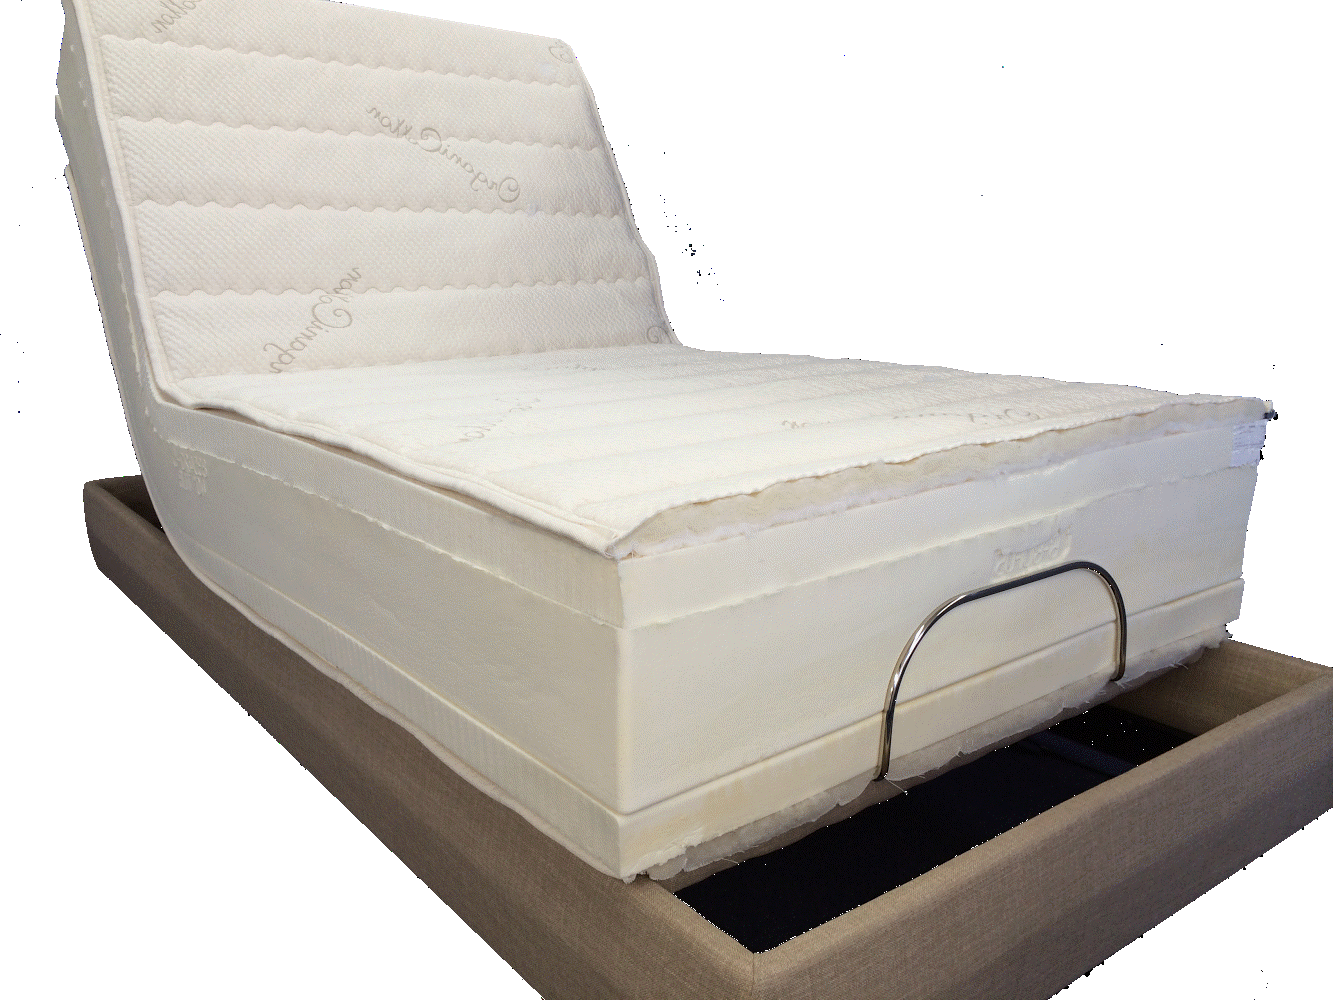 THE ULTIMATE by Latexpedic adjustable beds latex foam natural mattress